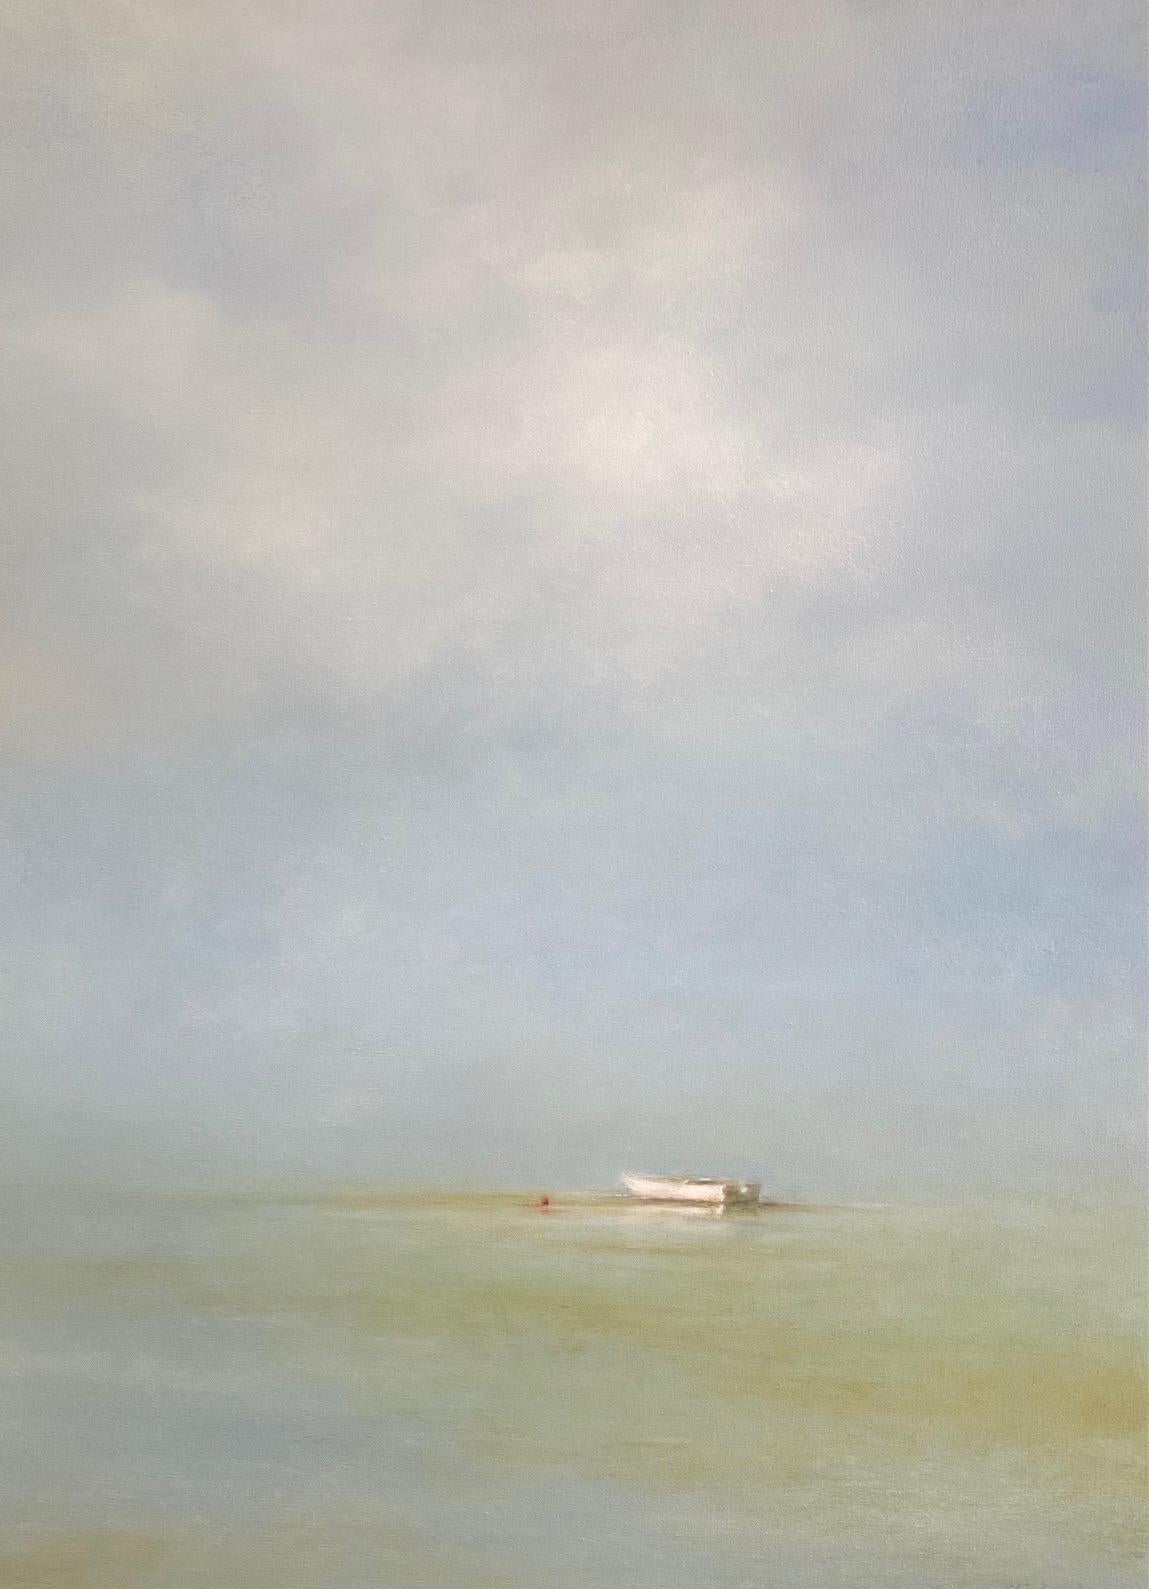 Landscape Painting Chieh-Nie Cherng - Dinghy at Sea, paysage marin contemporain original 40x30